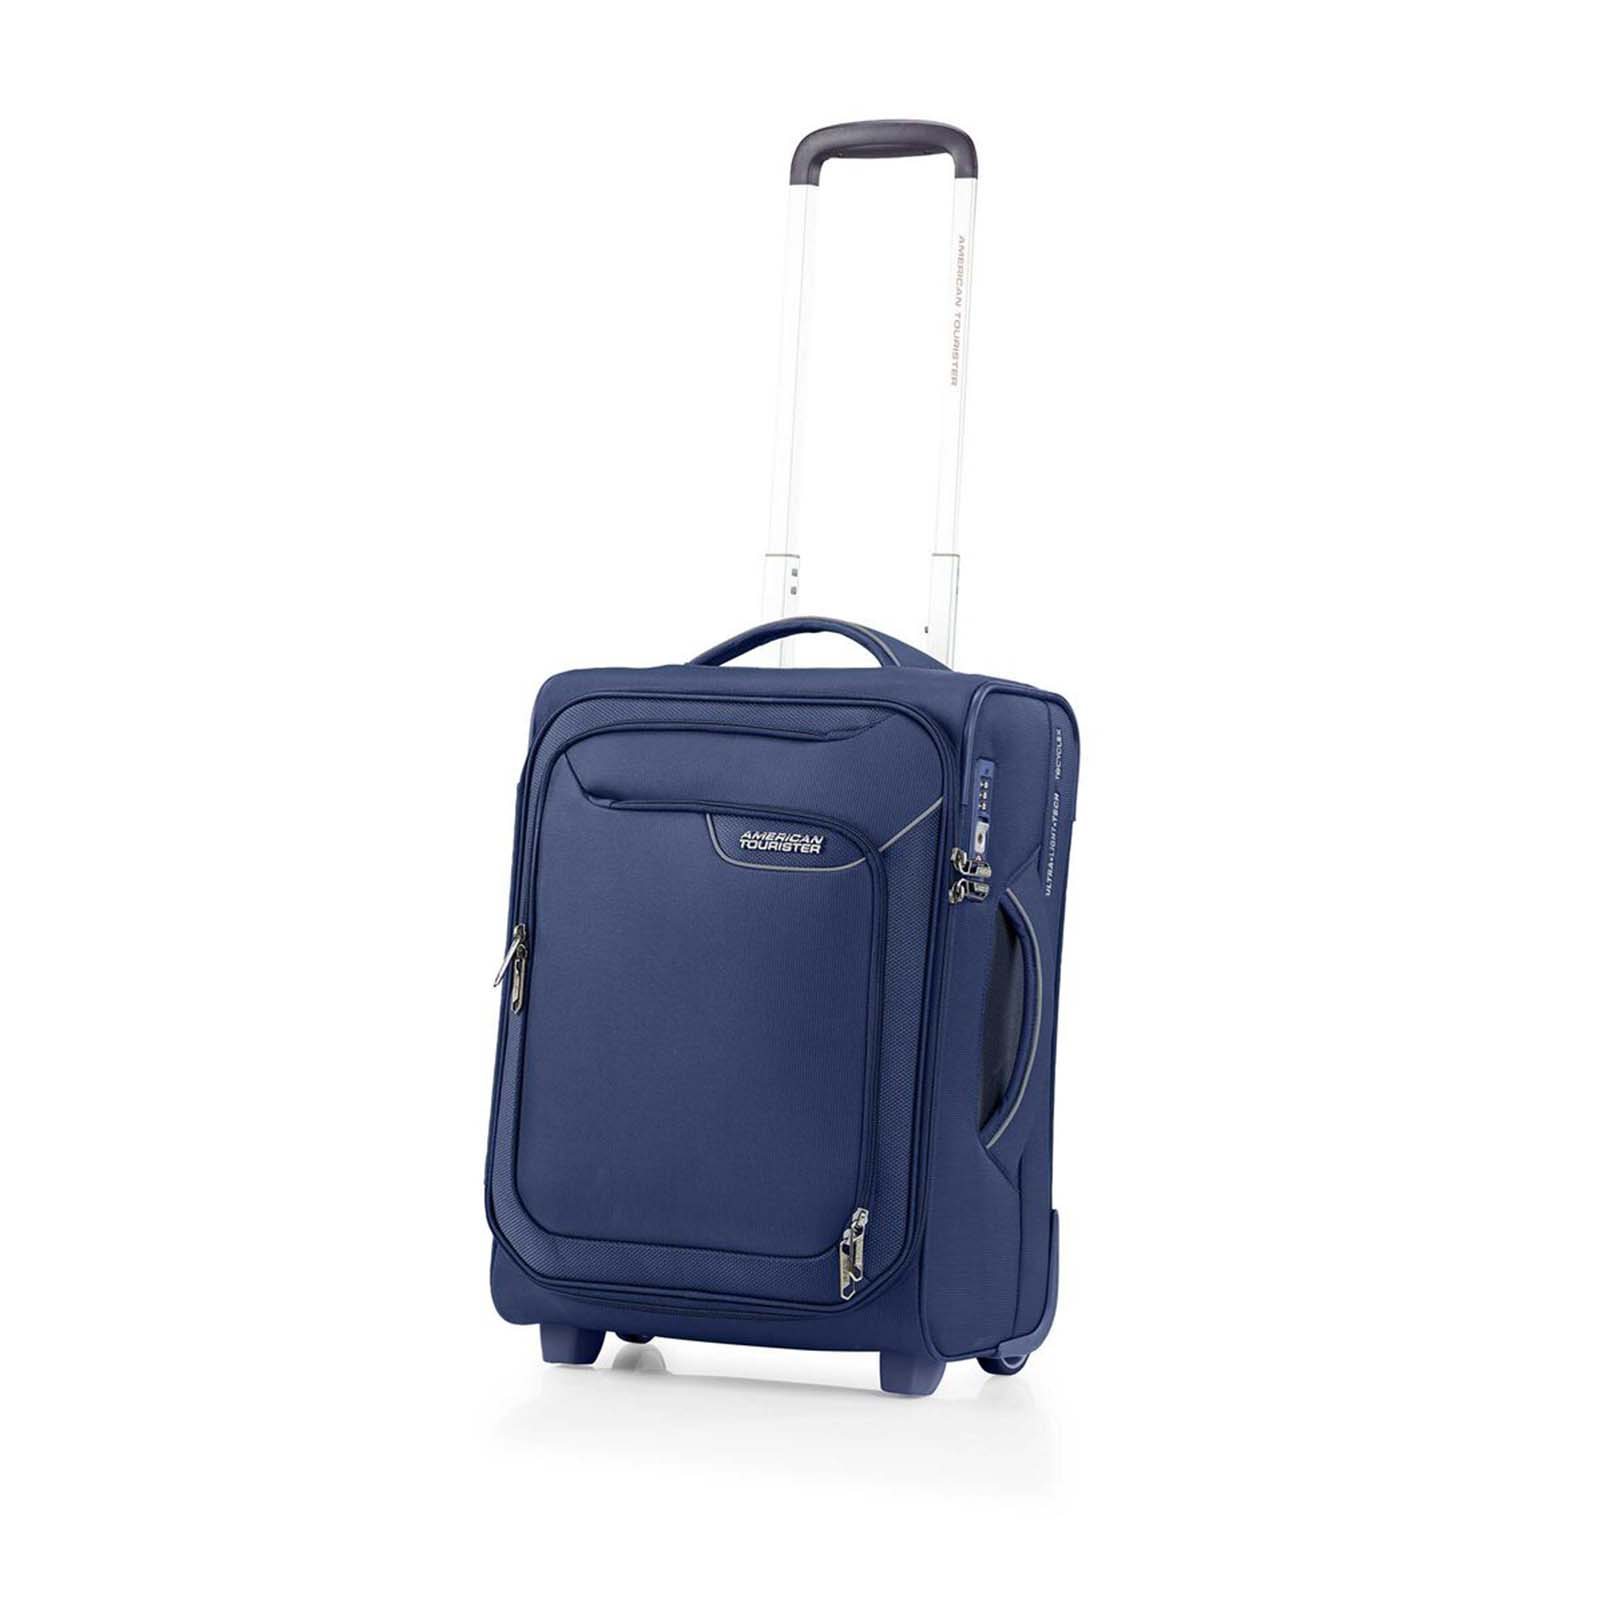 American-Tourister-Applite-4-Eco-50cm-Carry-On-Suitcase-Navy-Front-Angle